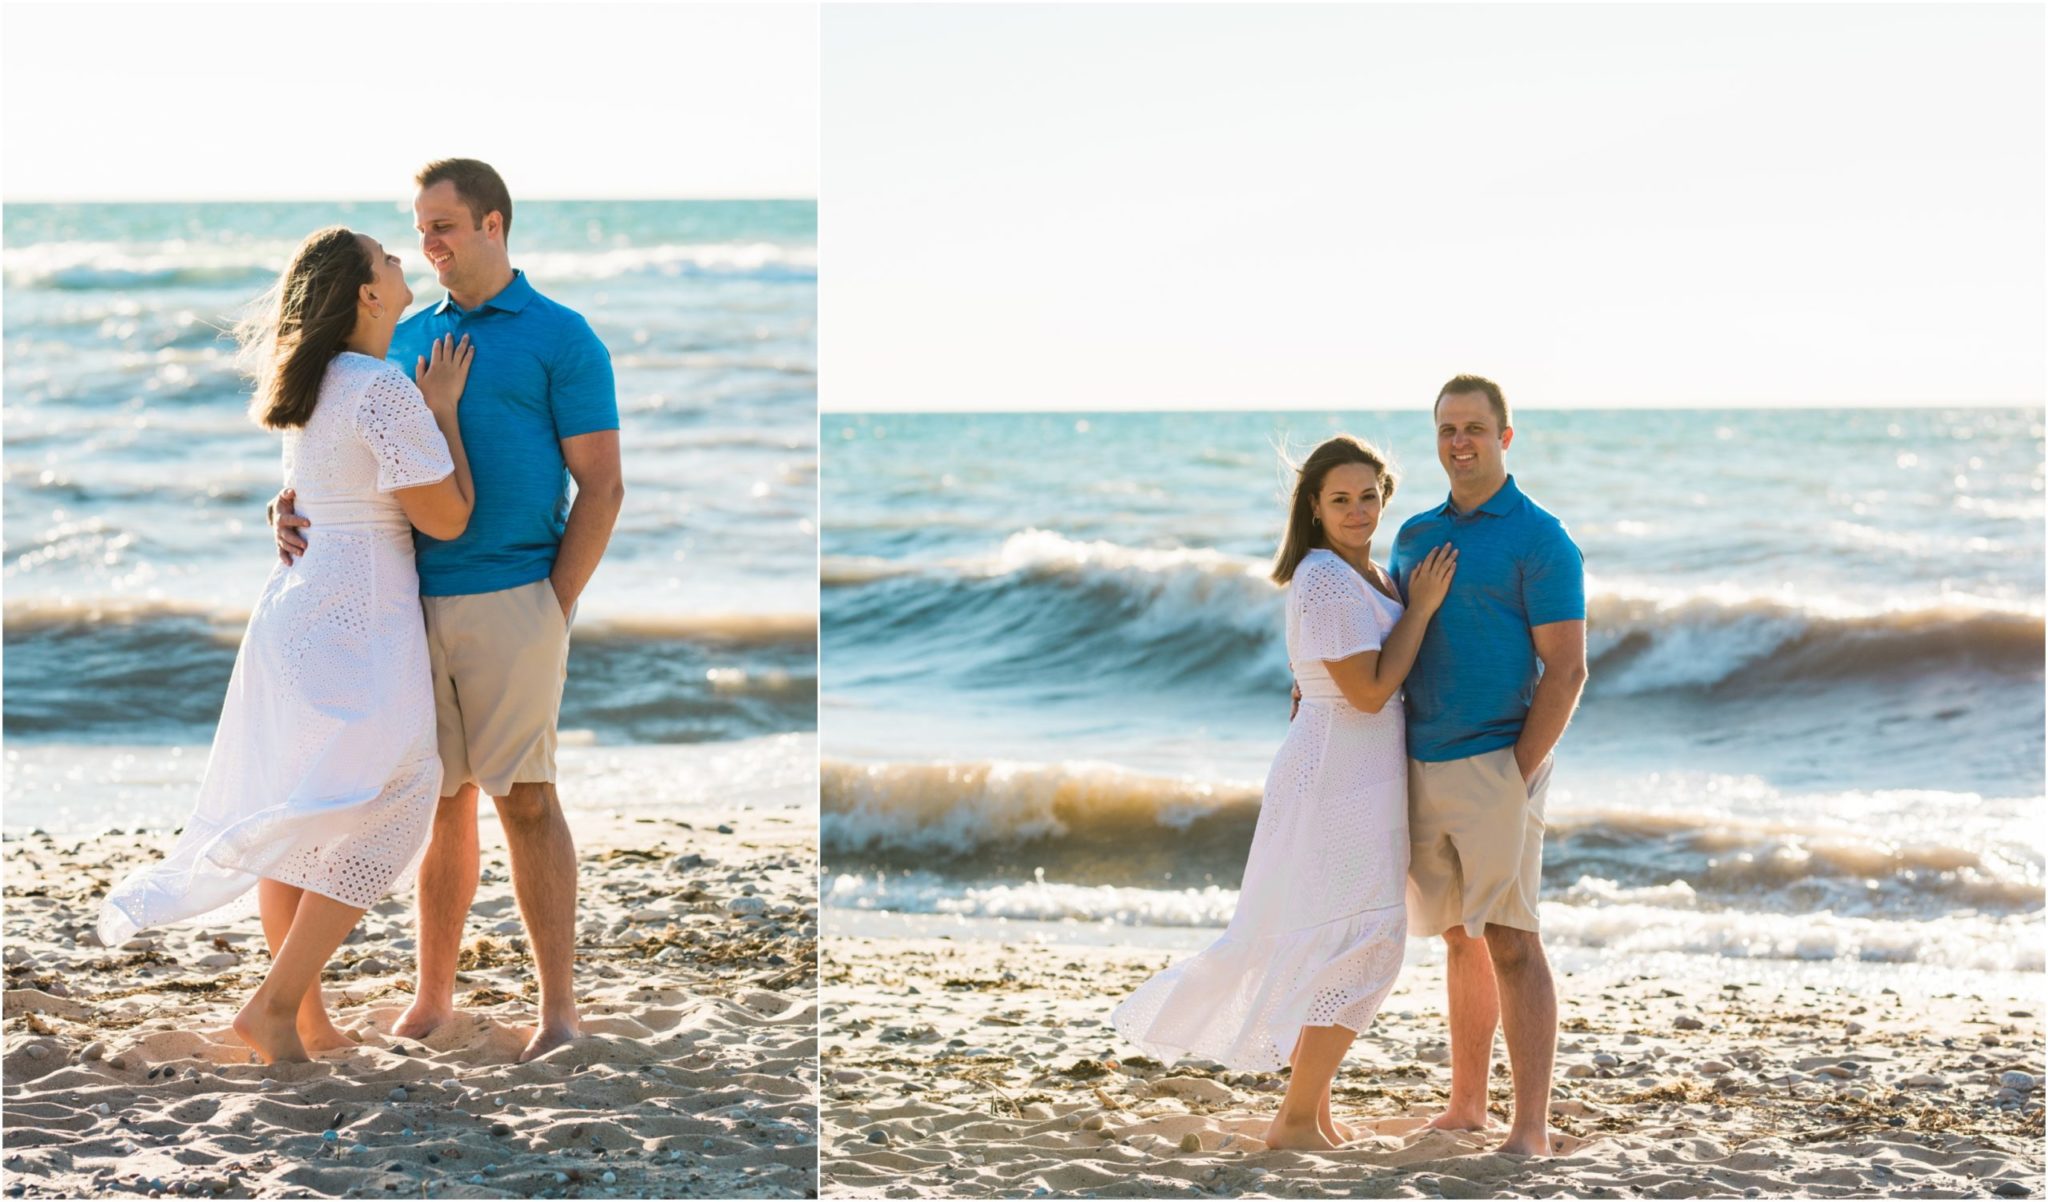 Collage image of a couple together on the beach in summer at South haven, MI.